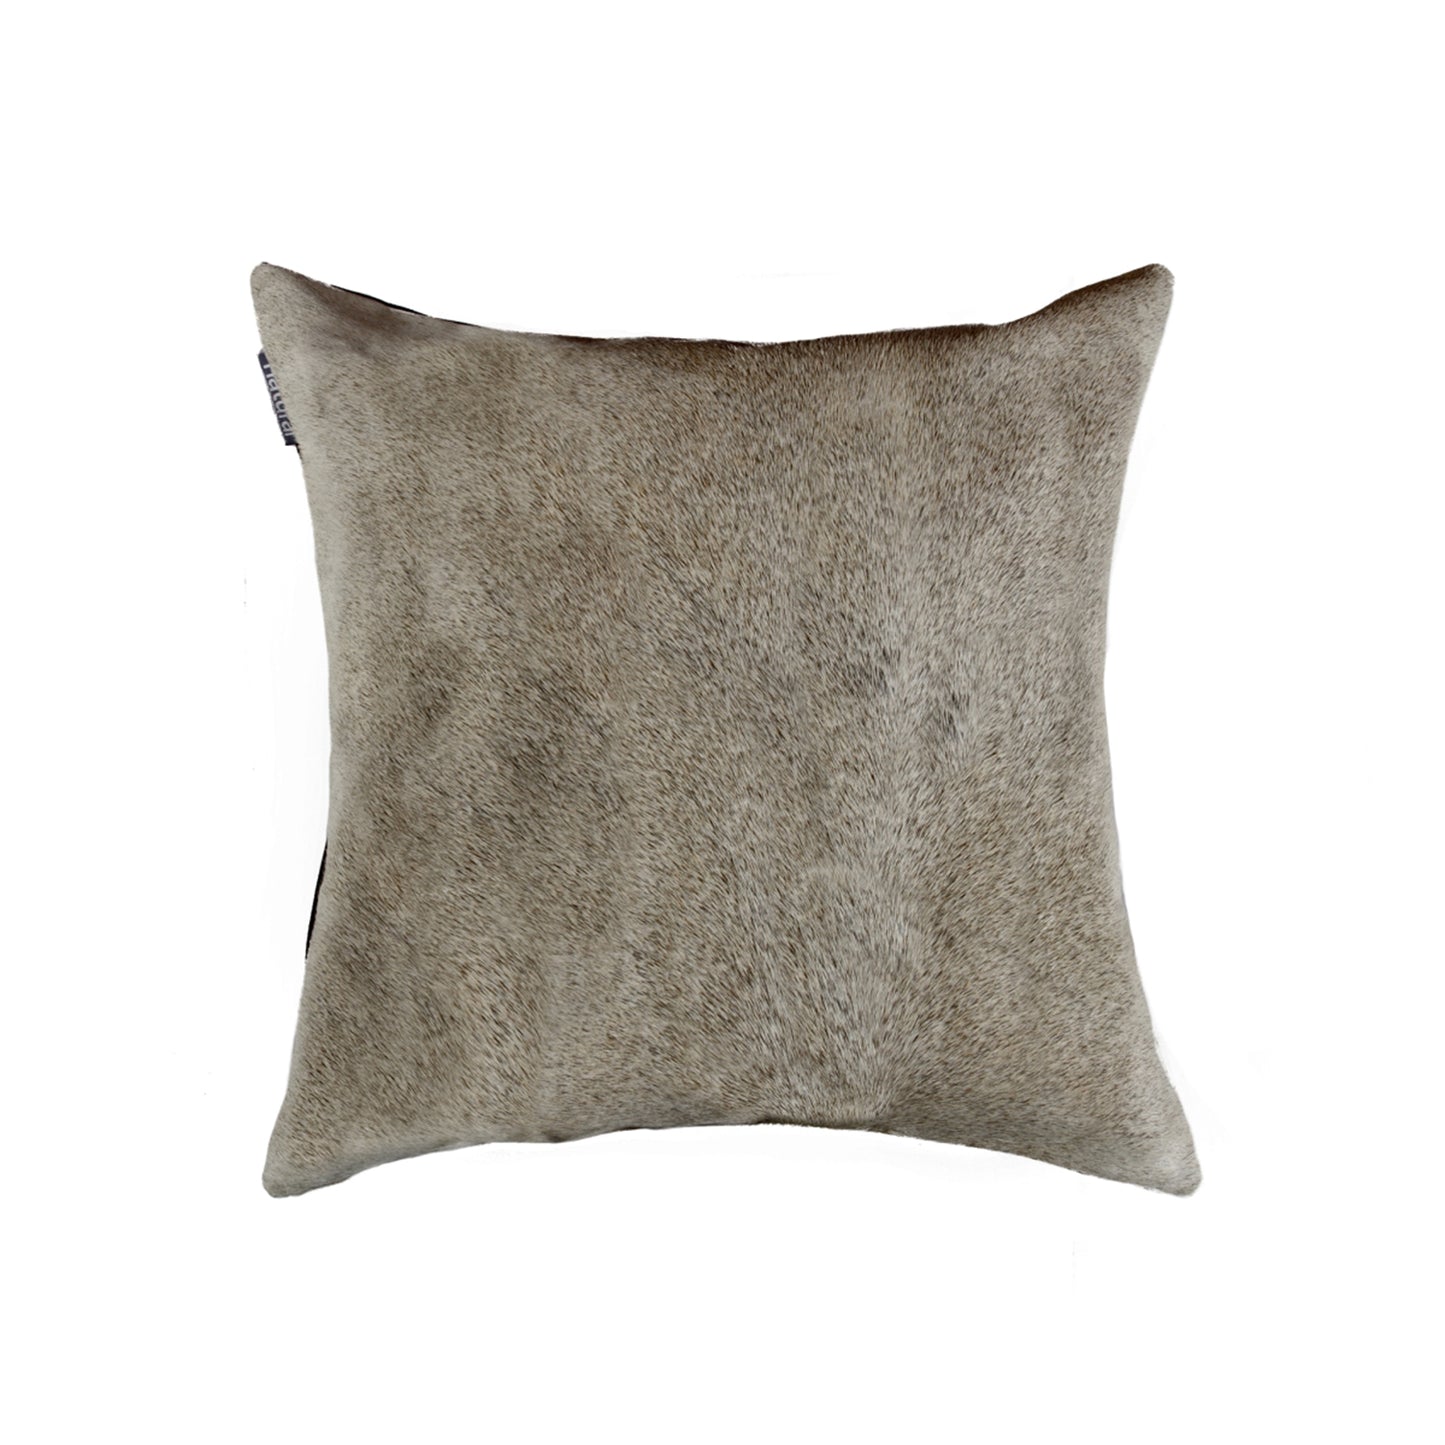 18" Gray Cowhide Throw Pillow